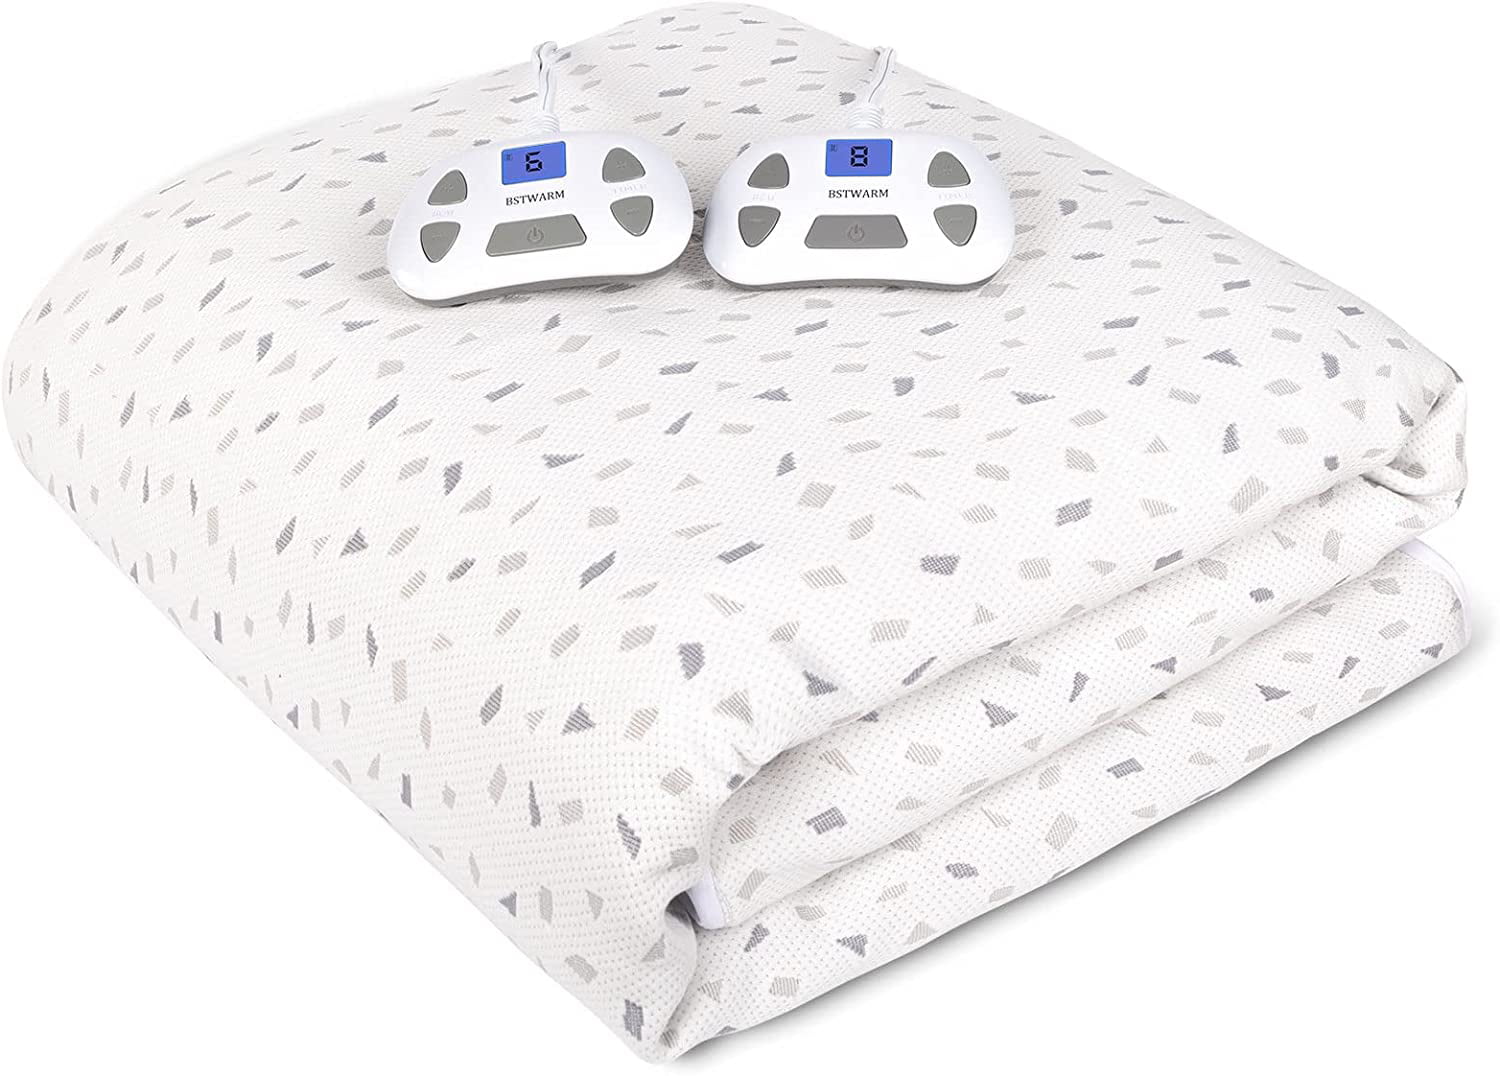 heated mattress cover allergies